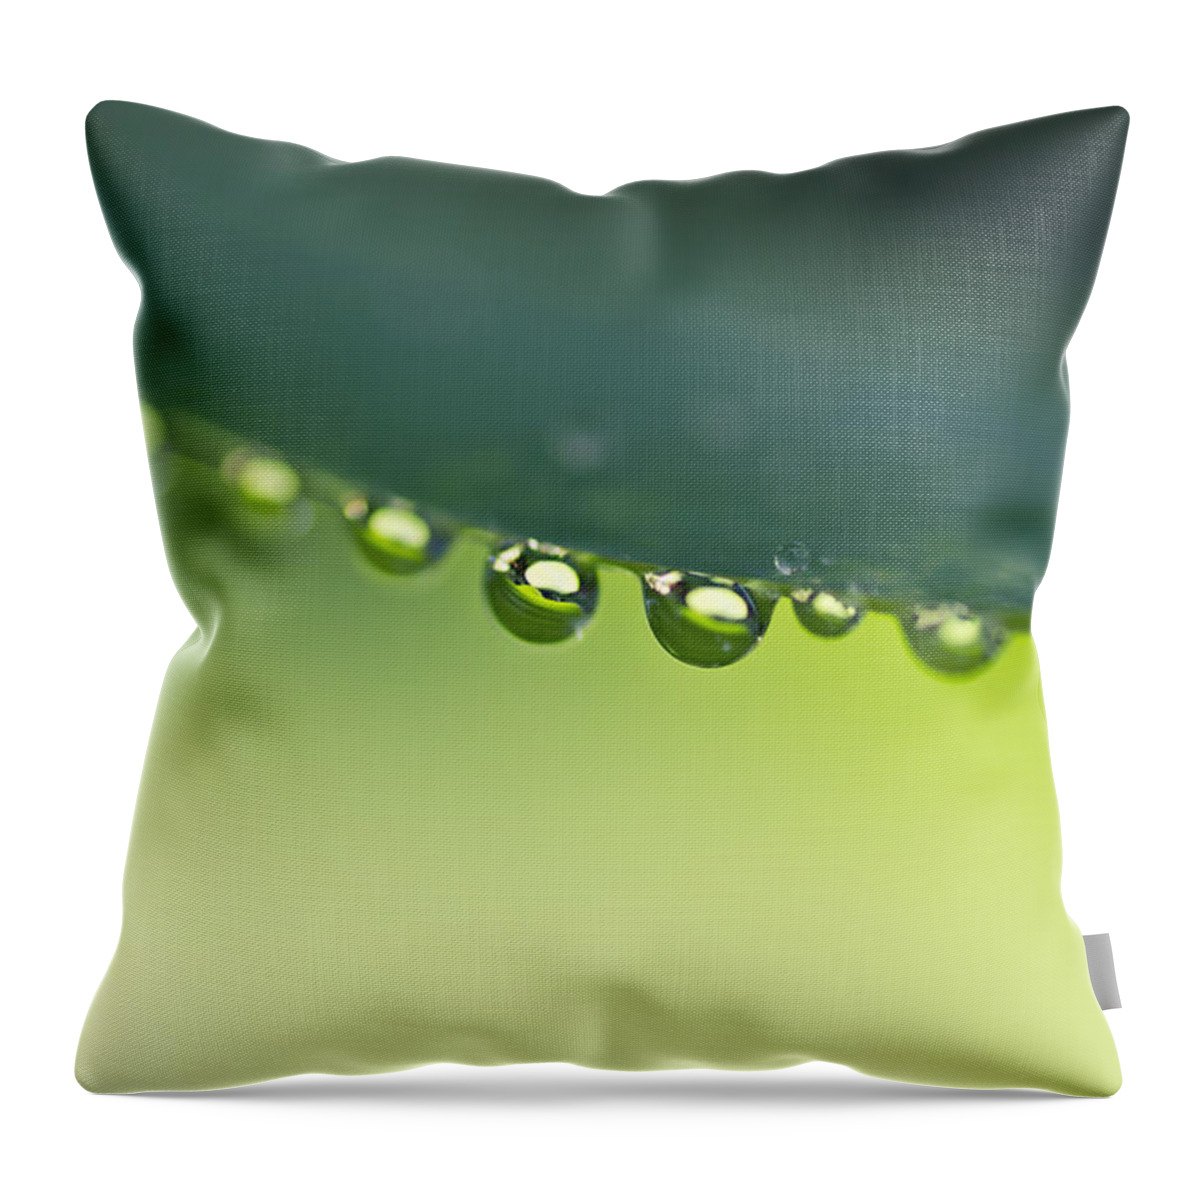 Drops Throw Pillow featuring the photograph The Edge I by Priya Ghose